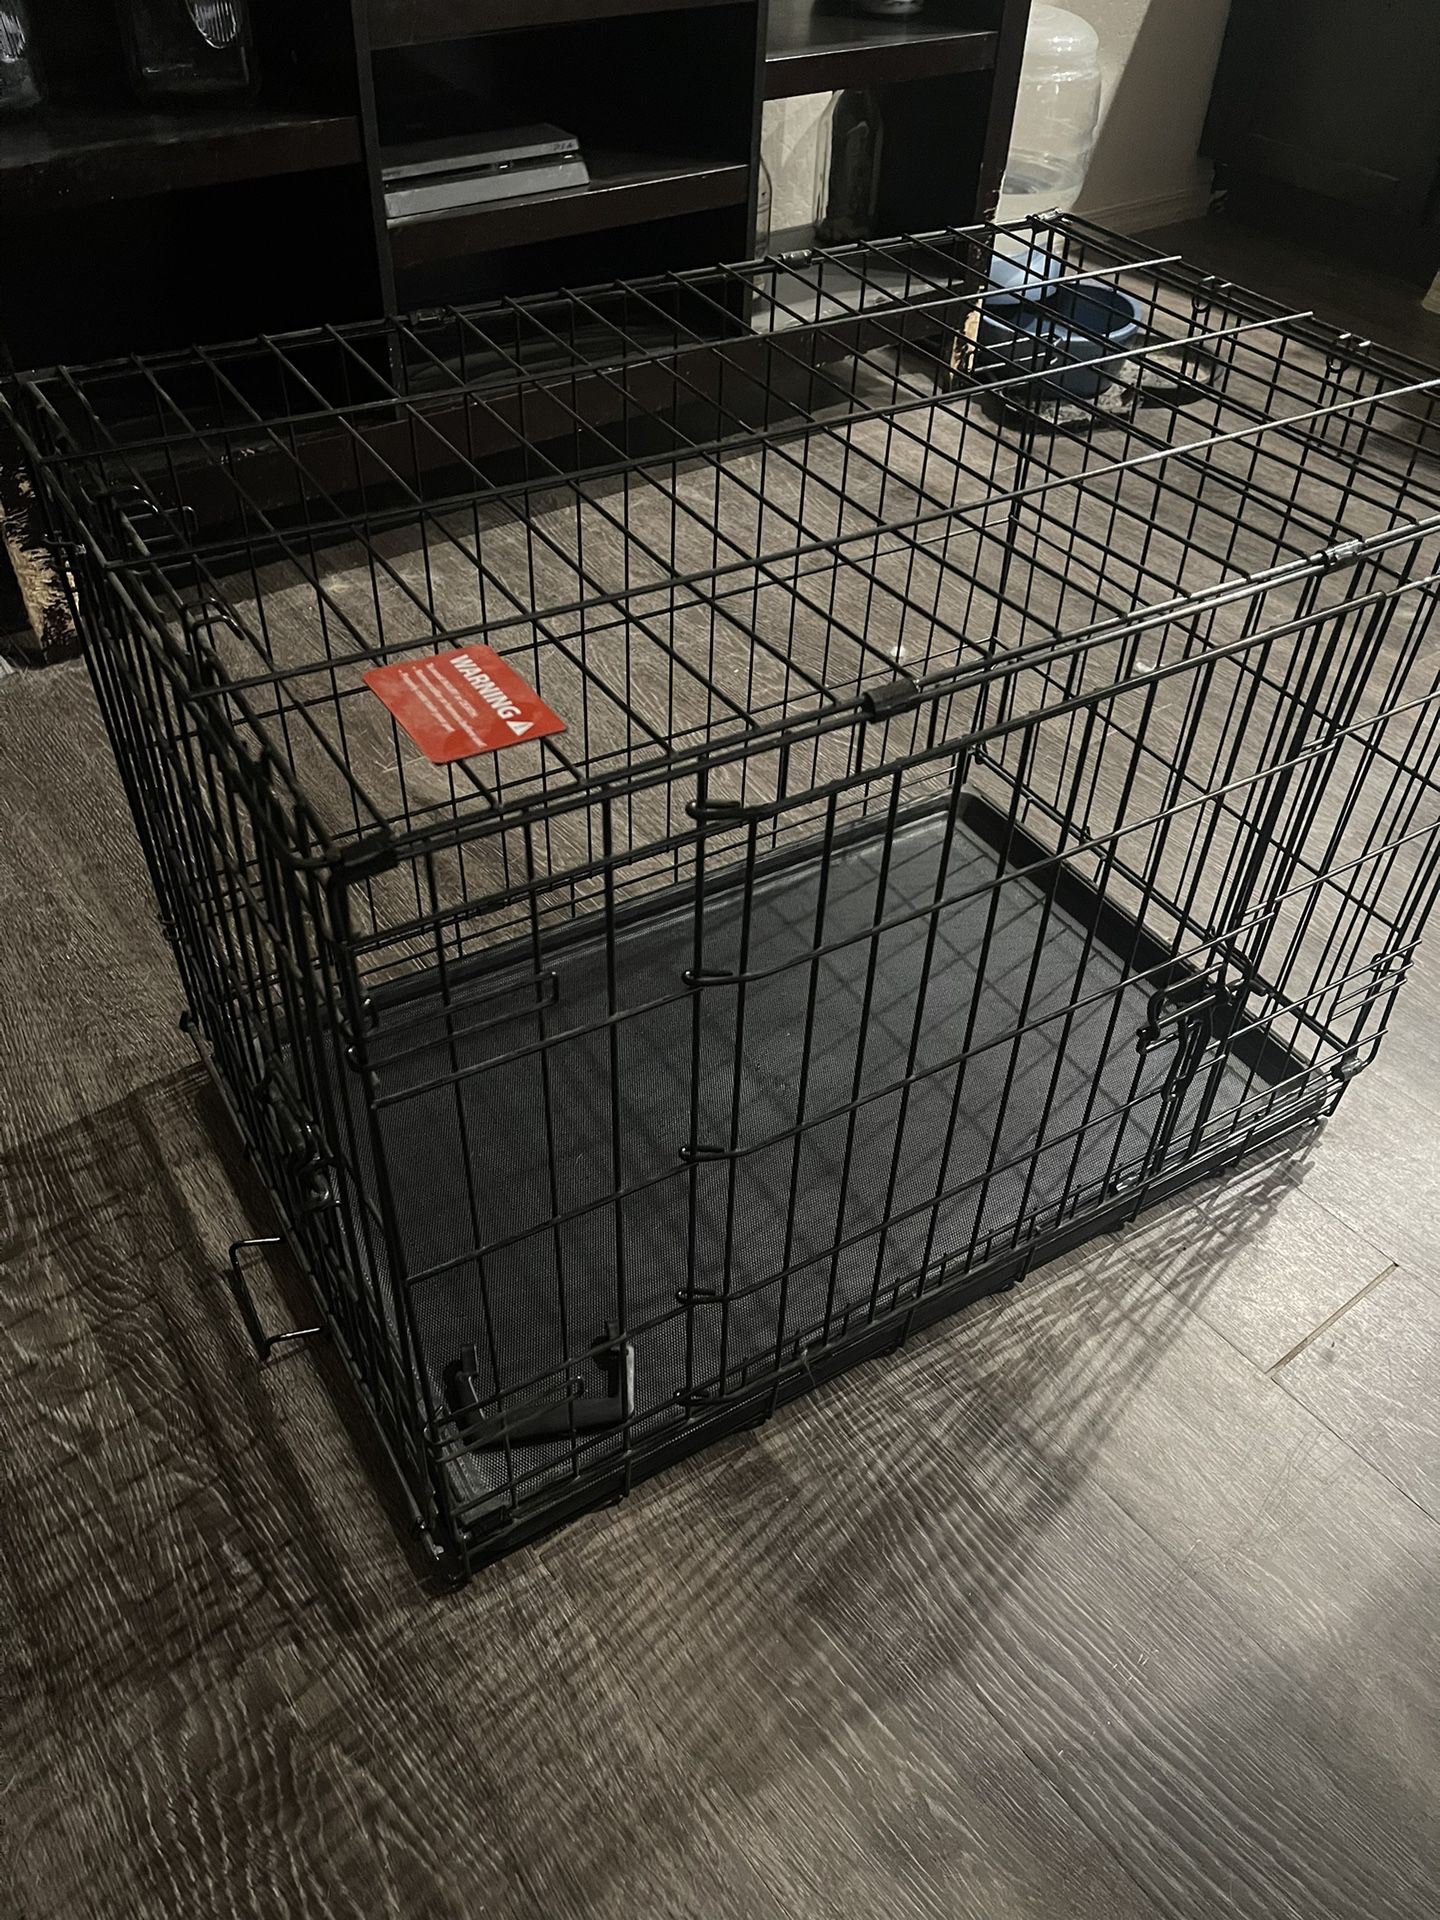 New Dog Cage 30x19x21